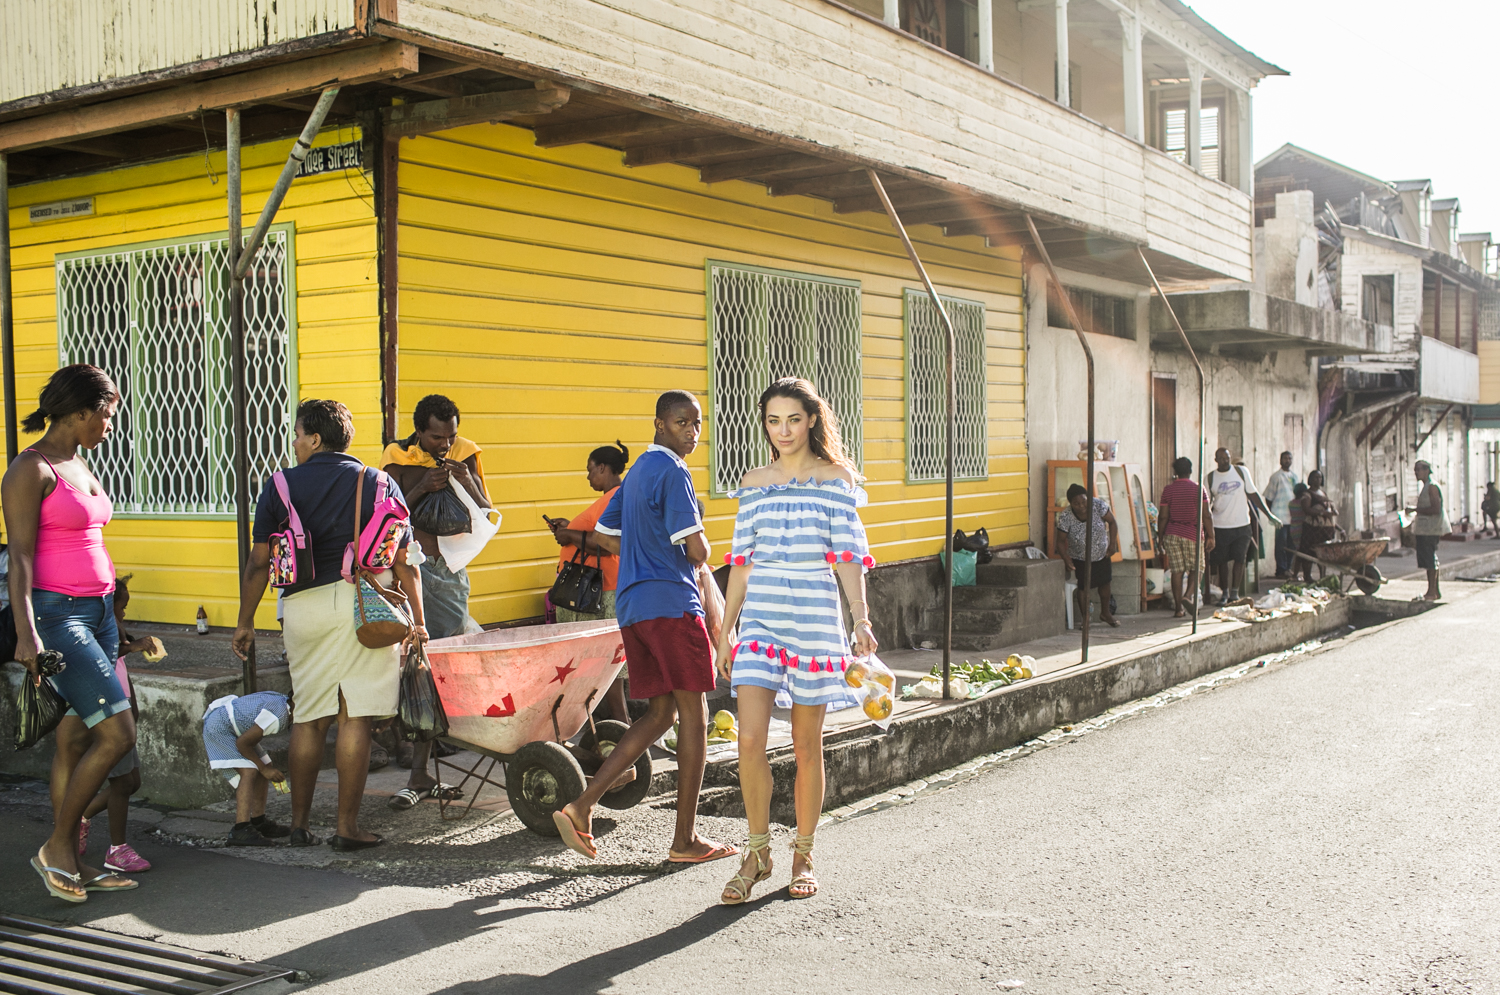 Russian model and blogger Xenia and photographer Samuel Black exploring St Lucia. Xenia wears Sundress official in local fishermen villages.